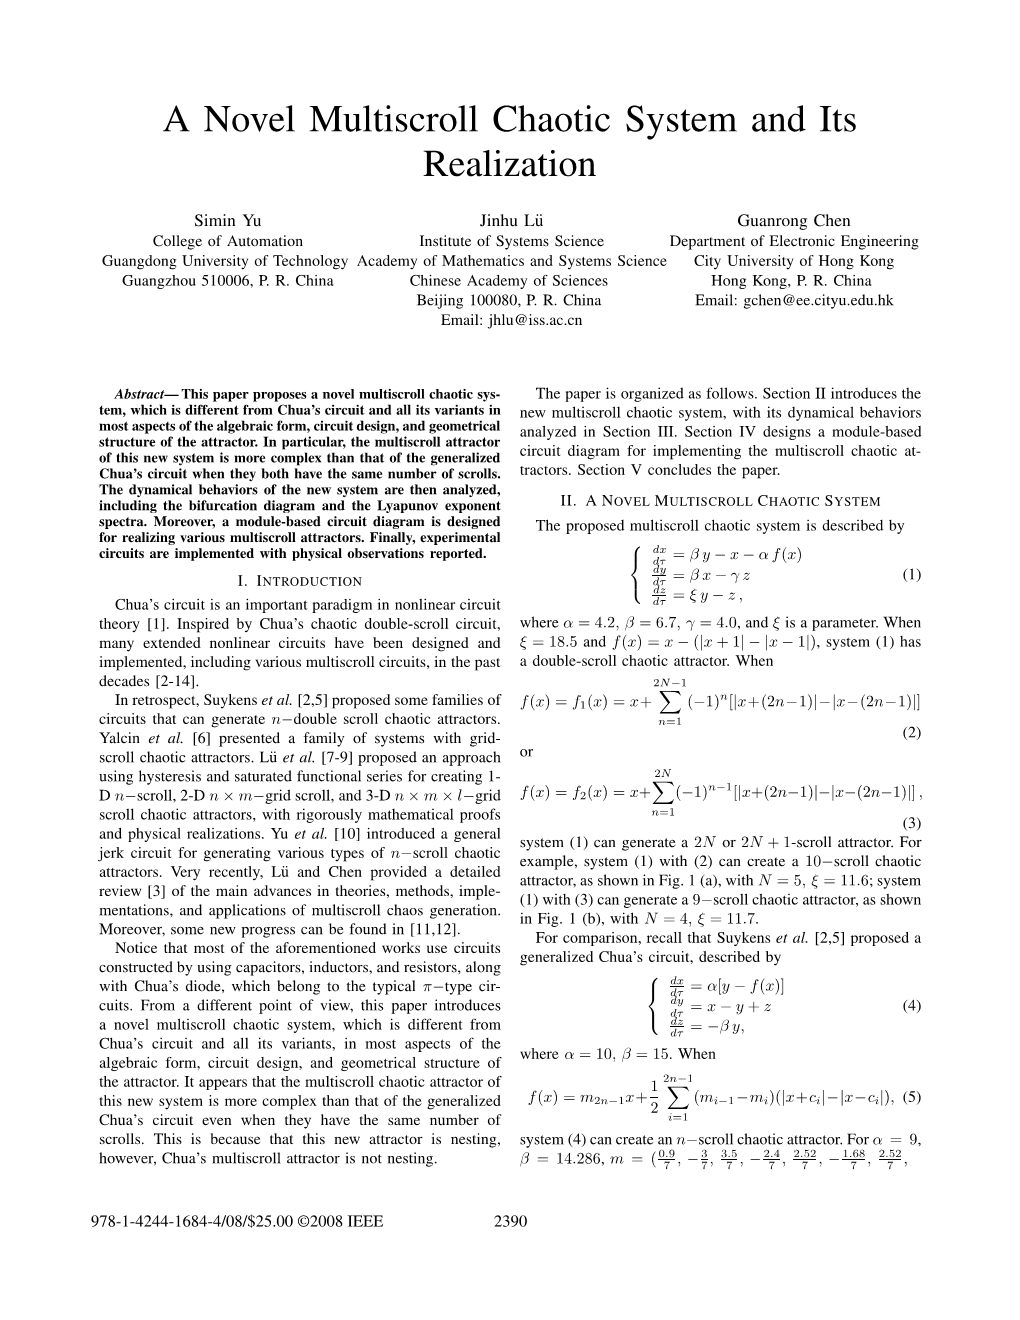 A Novel Multiscroll Chaotic System and Its Realization